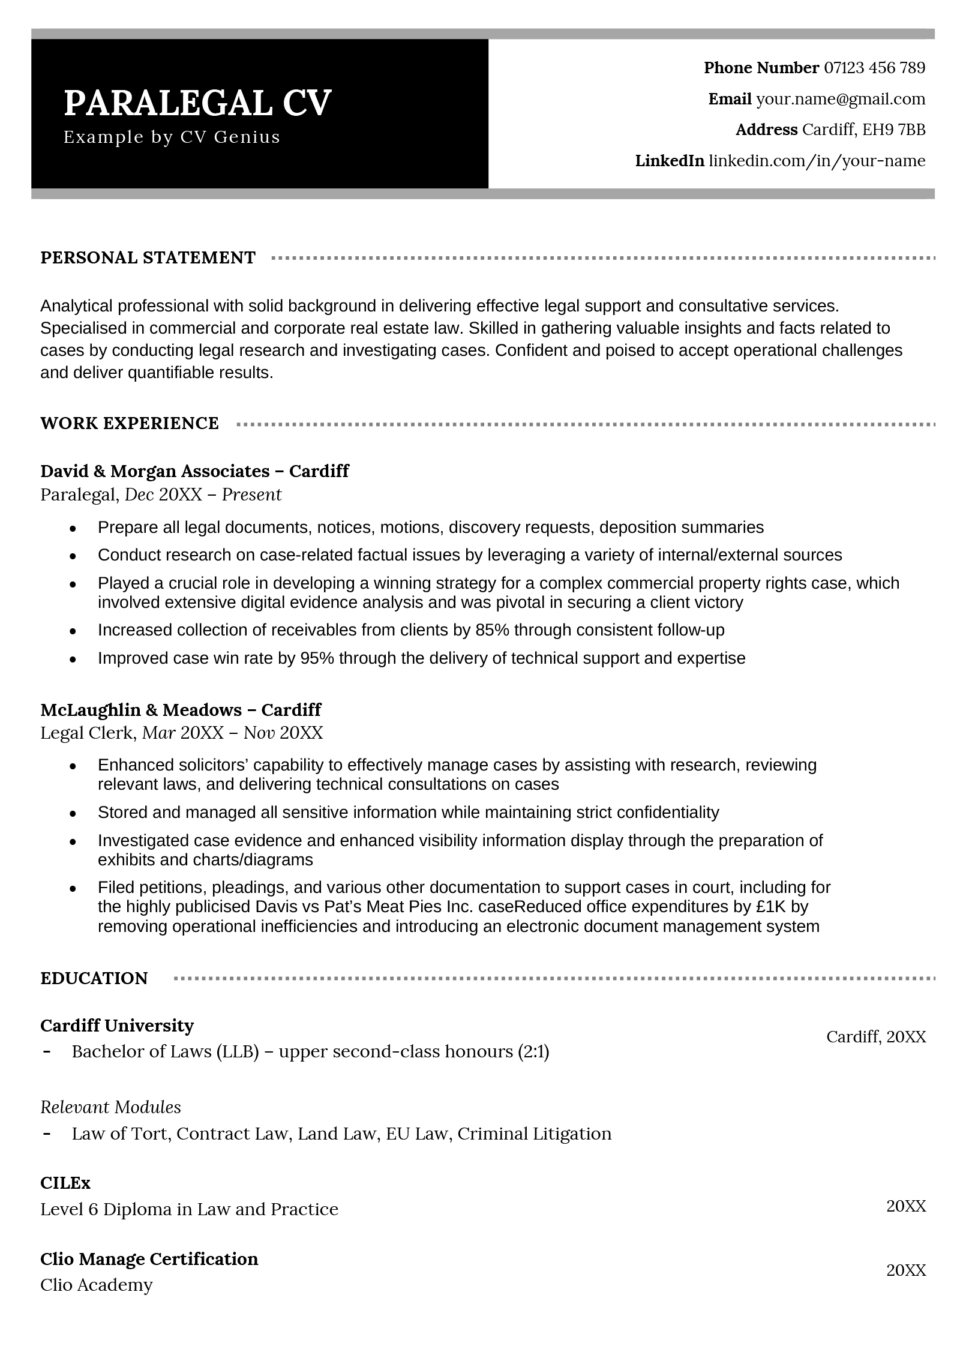 The first page of a black and white paralegal CV, showing the applicant's contact information, personal statement, and legal experience.